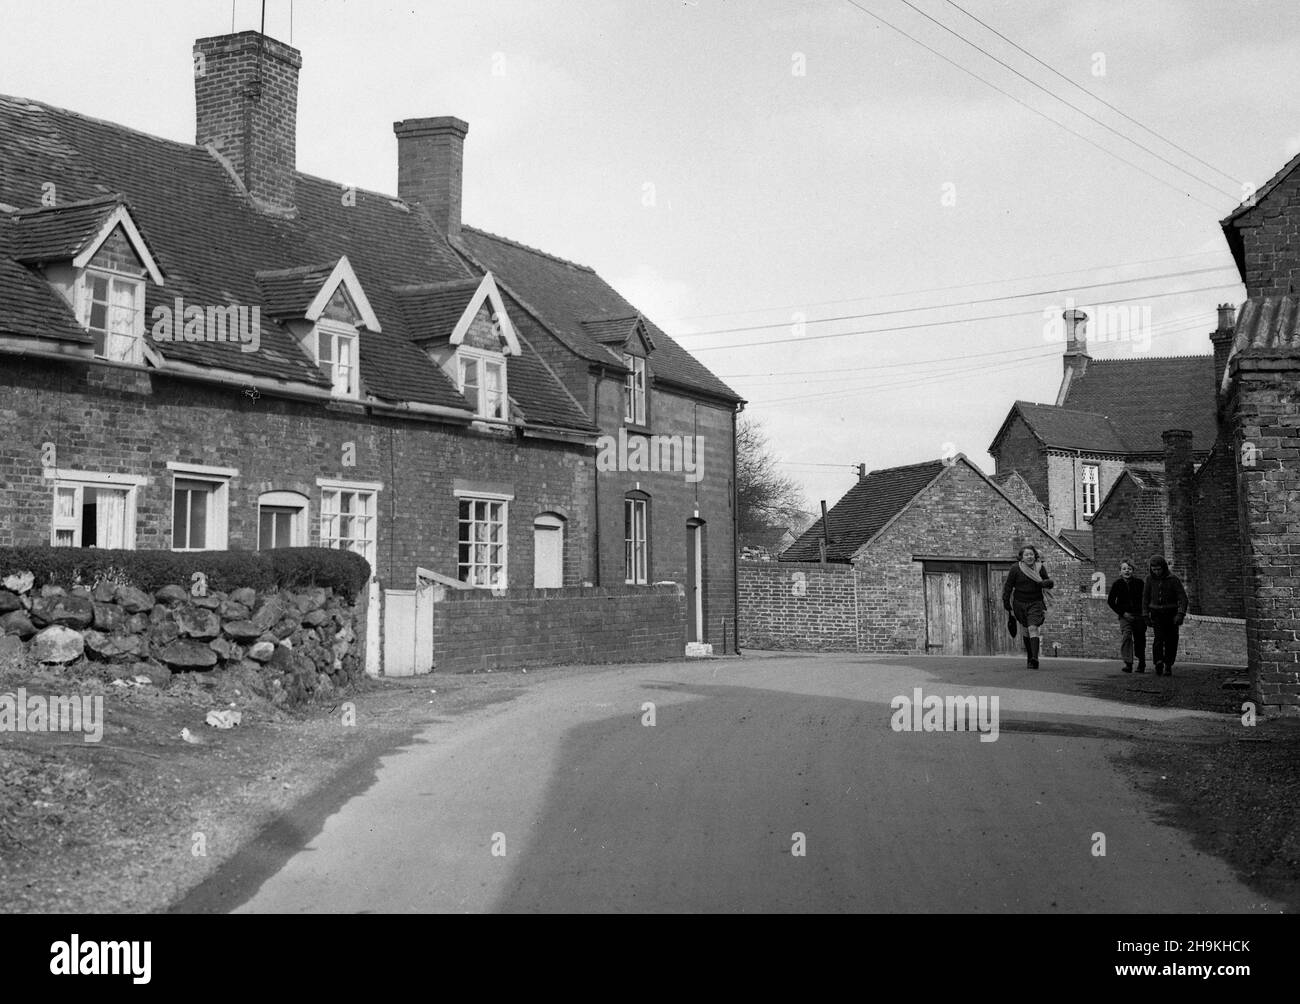 Madeley Shropshire in 1967. Britain 1960s Stock Photo